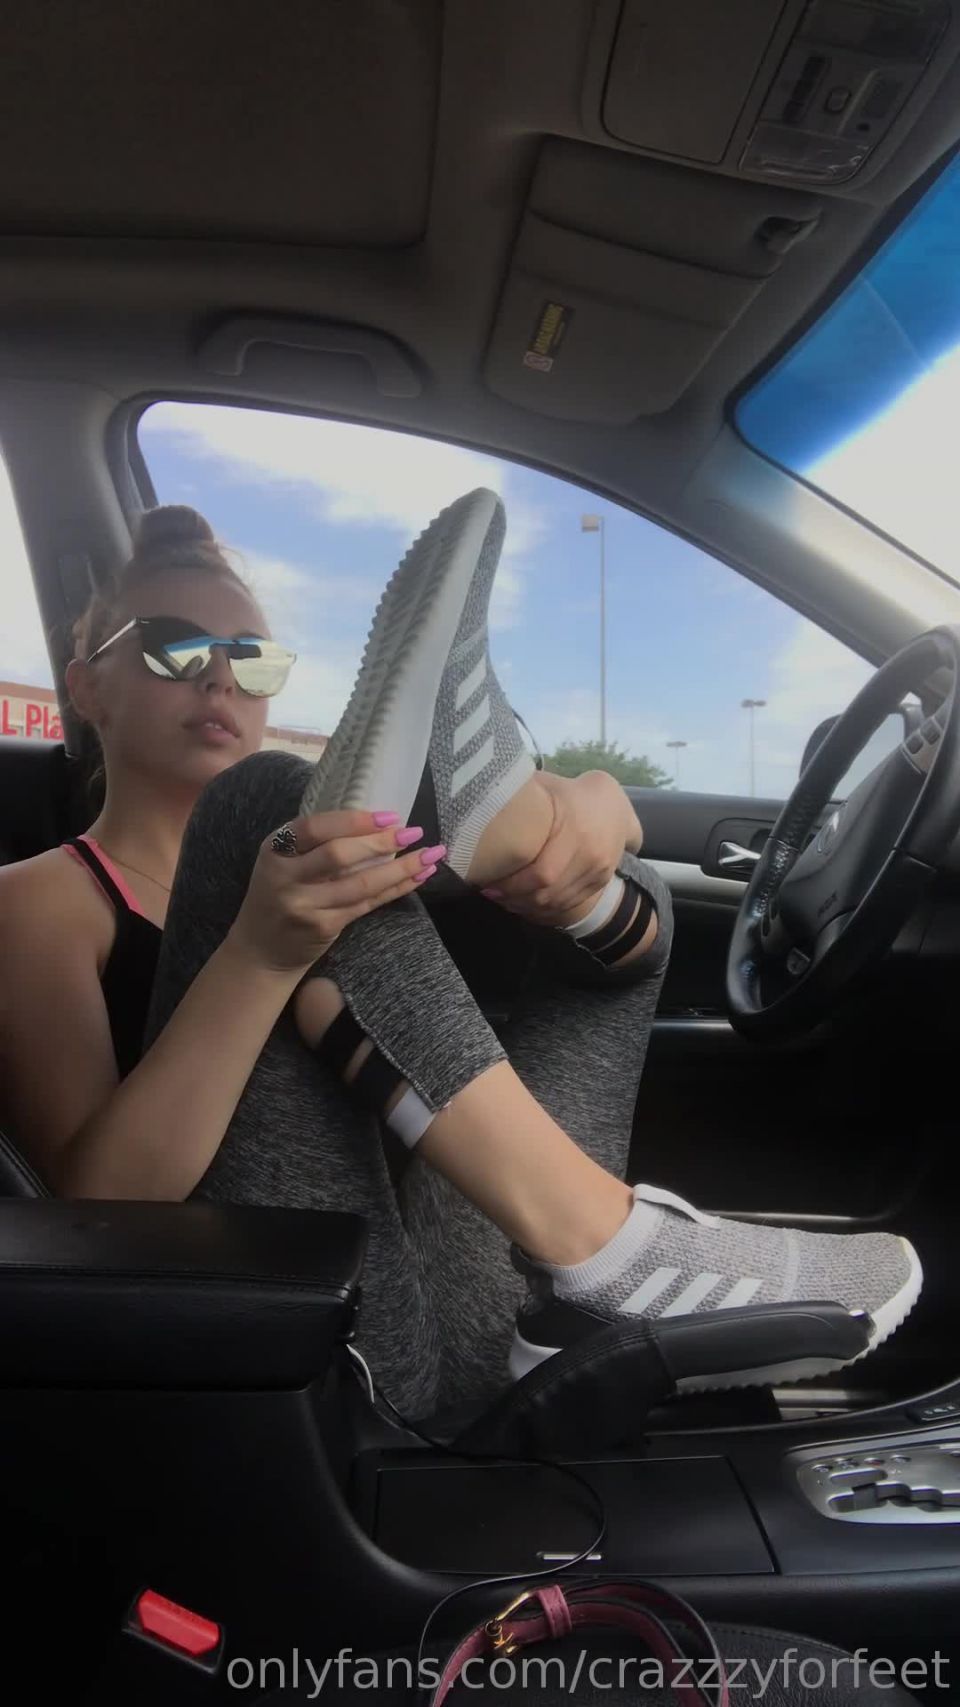 crazzzyforfeet  6932704 Taking off my sneakers and showing off my feet in the car - crazzzyforfeet - femdom porn dee williams femdom